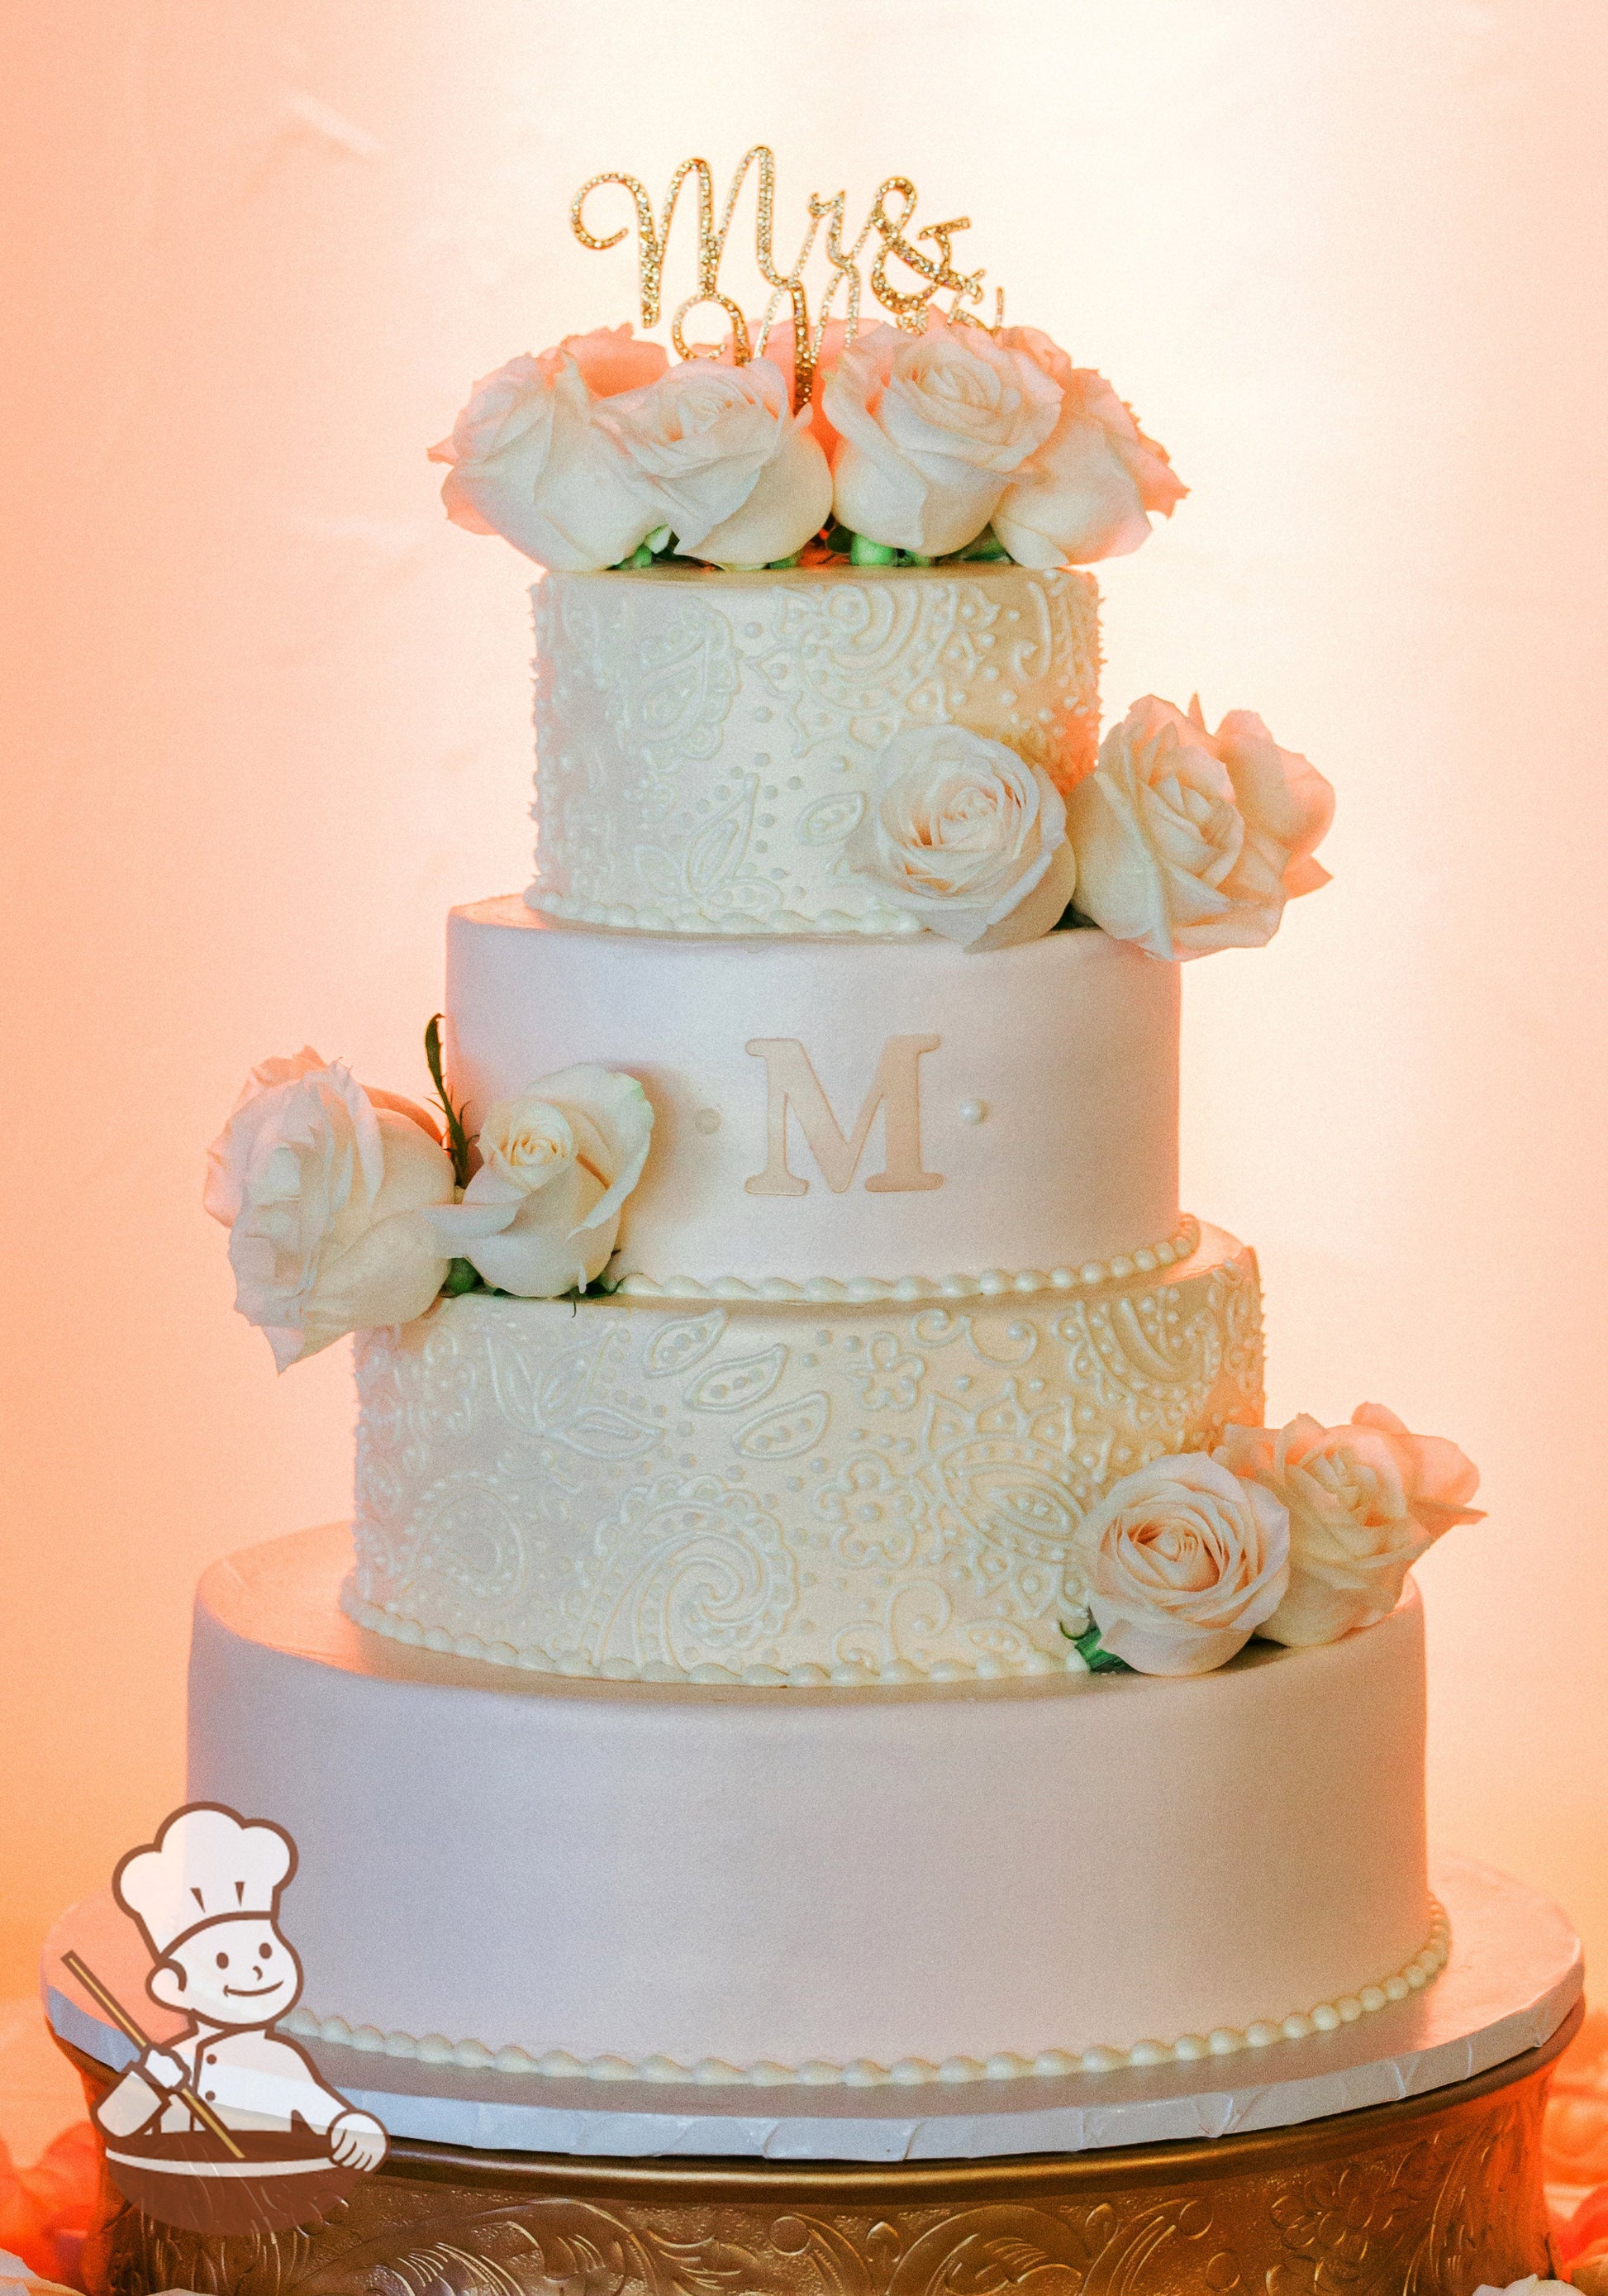 4-tier cake with blush-pink icing on the bottom and third tier and white smooth icing on the second and top tier with piped flowers & scrolls.